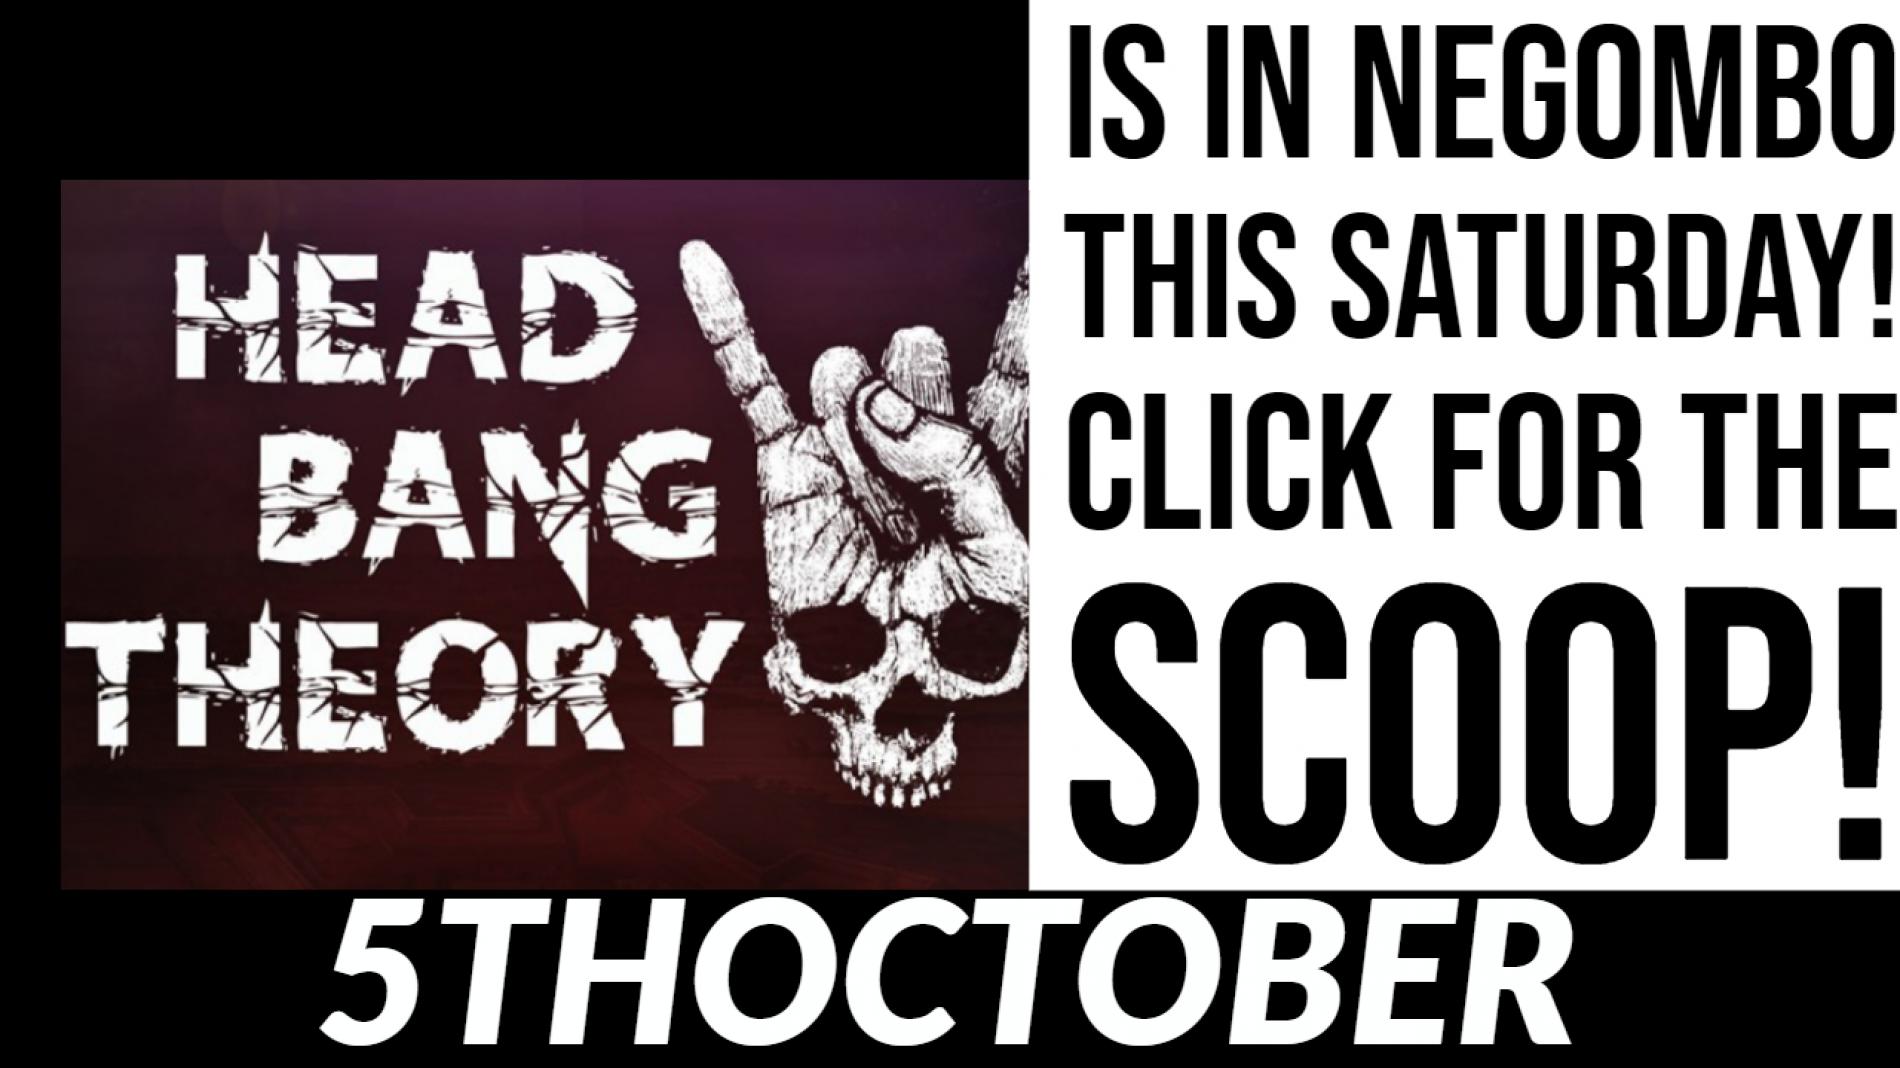 HeadBang Theory Is On This Saturday In Negombo!